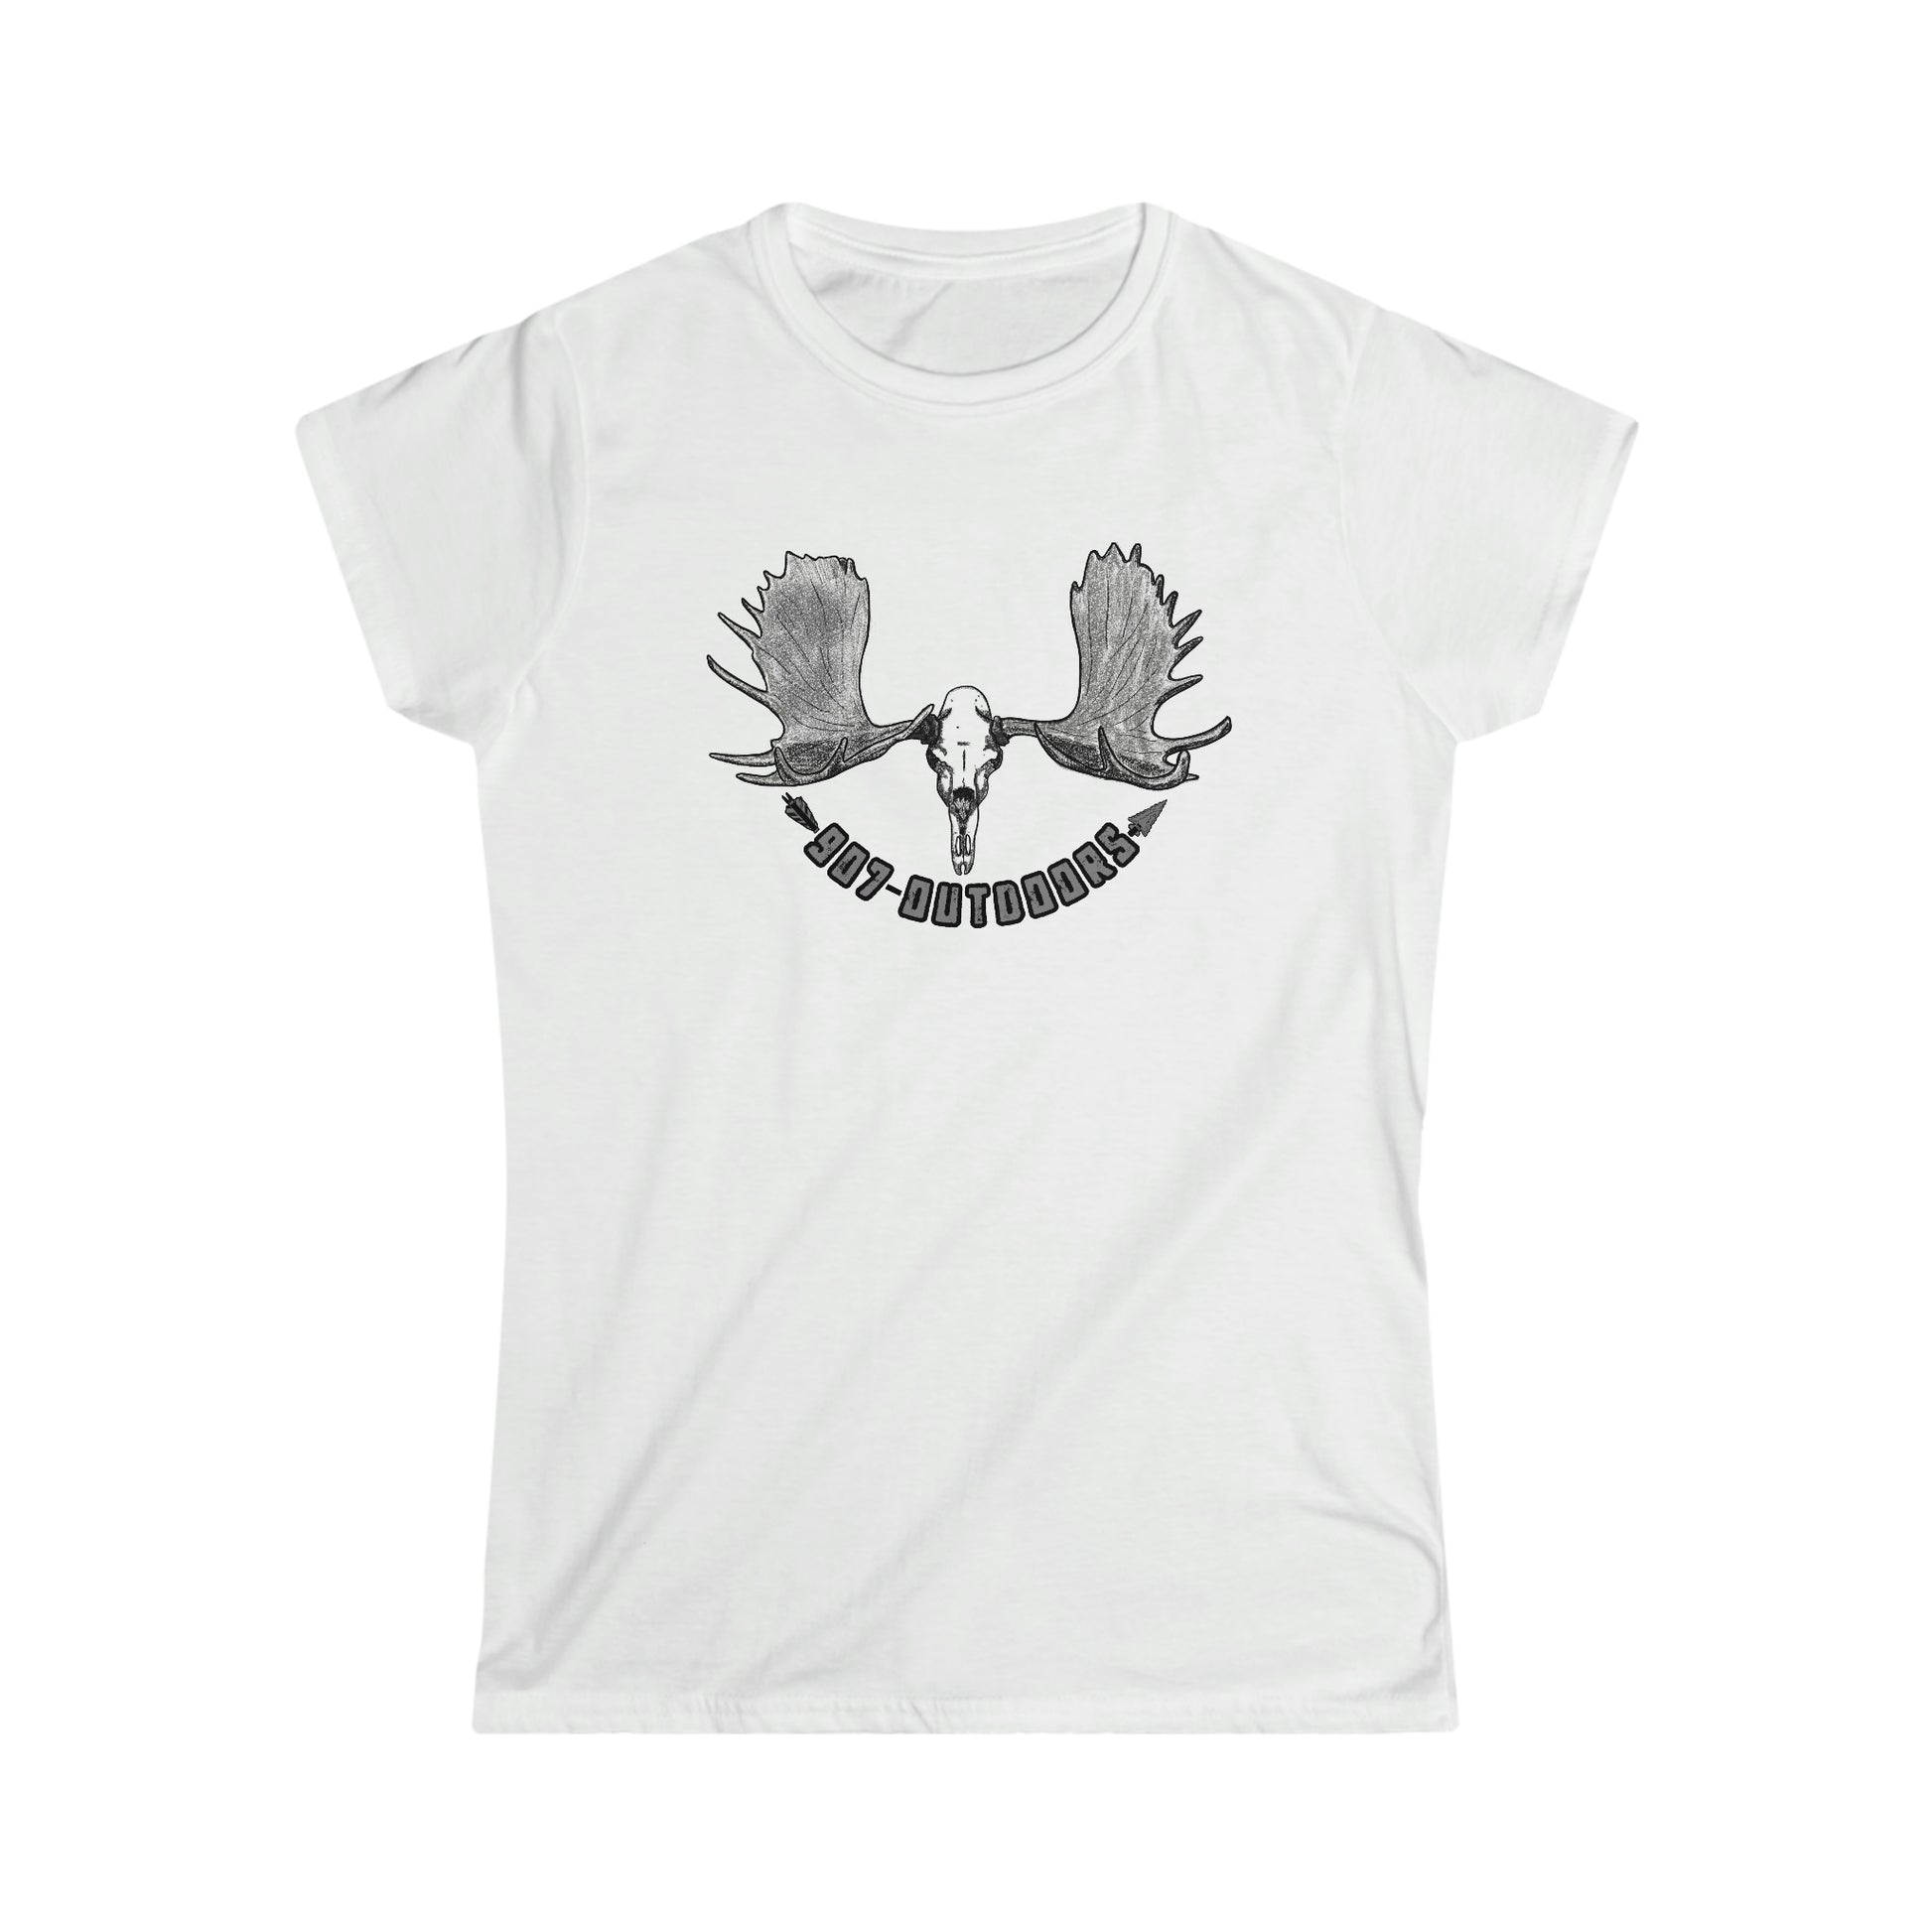 Moose Women's Softstyle Tee - 907Outdoors